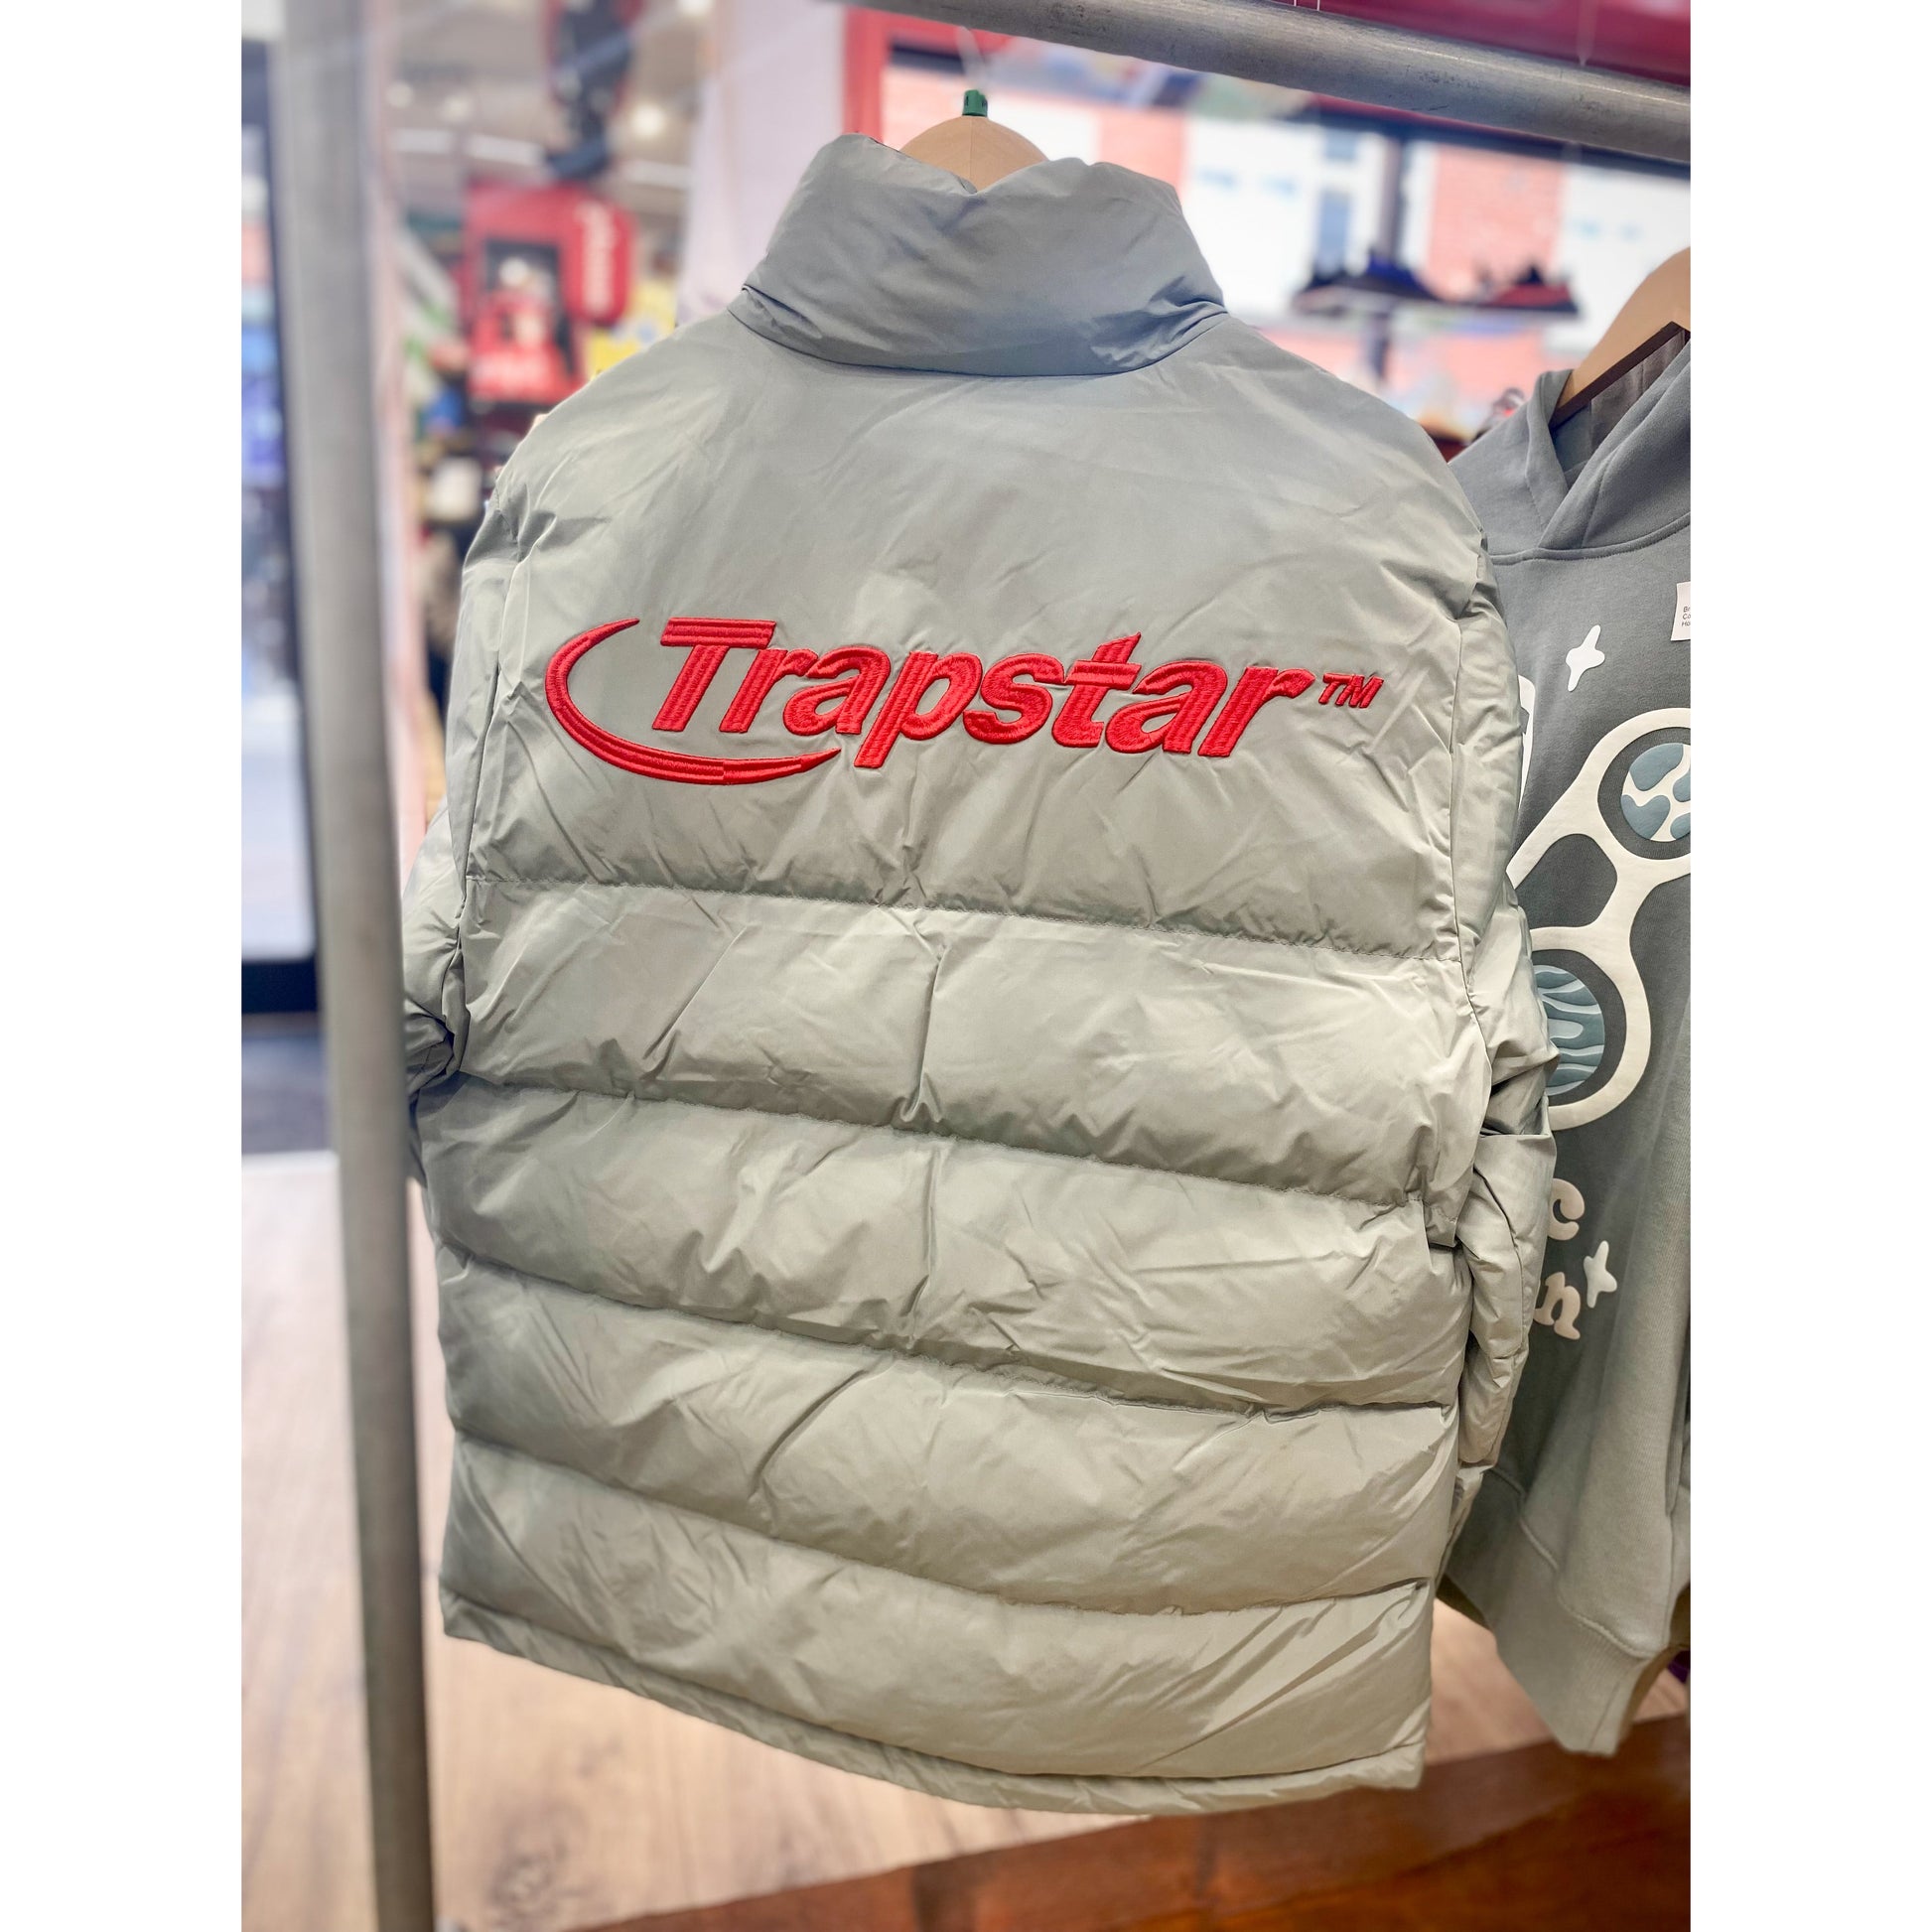 TRAPSTAR LIGHT GREY/RED HYPERDRIVE 2.0 BOMBER JACKET by Trapstar from £200.00